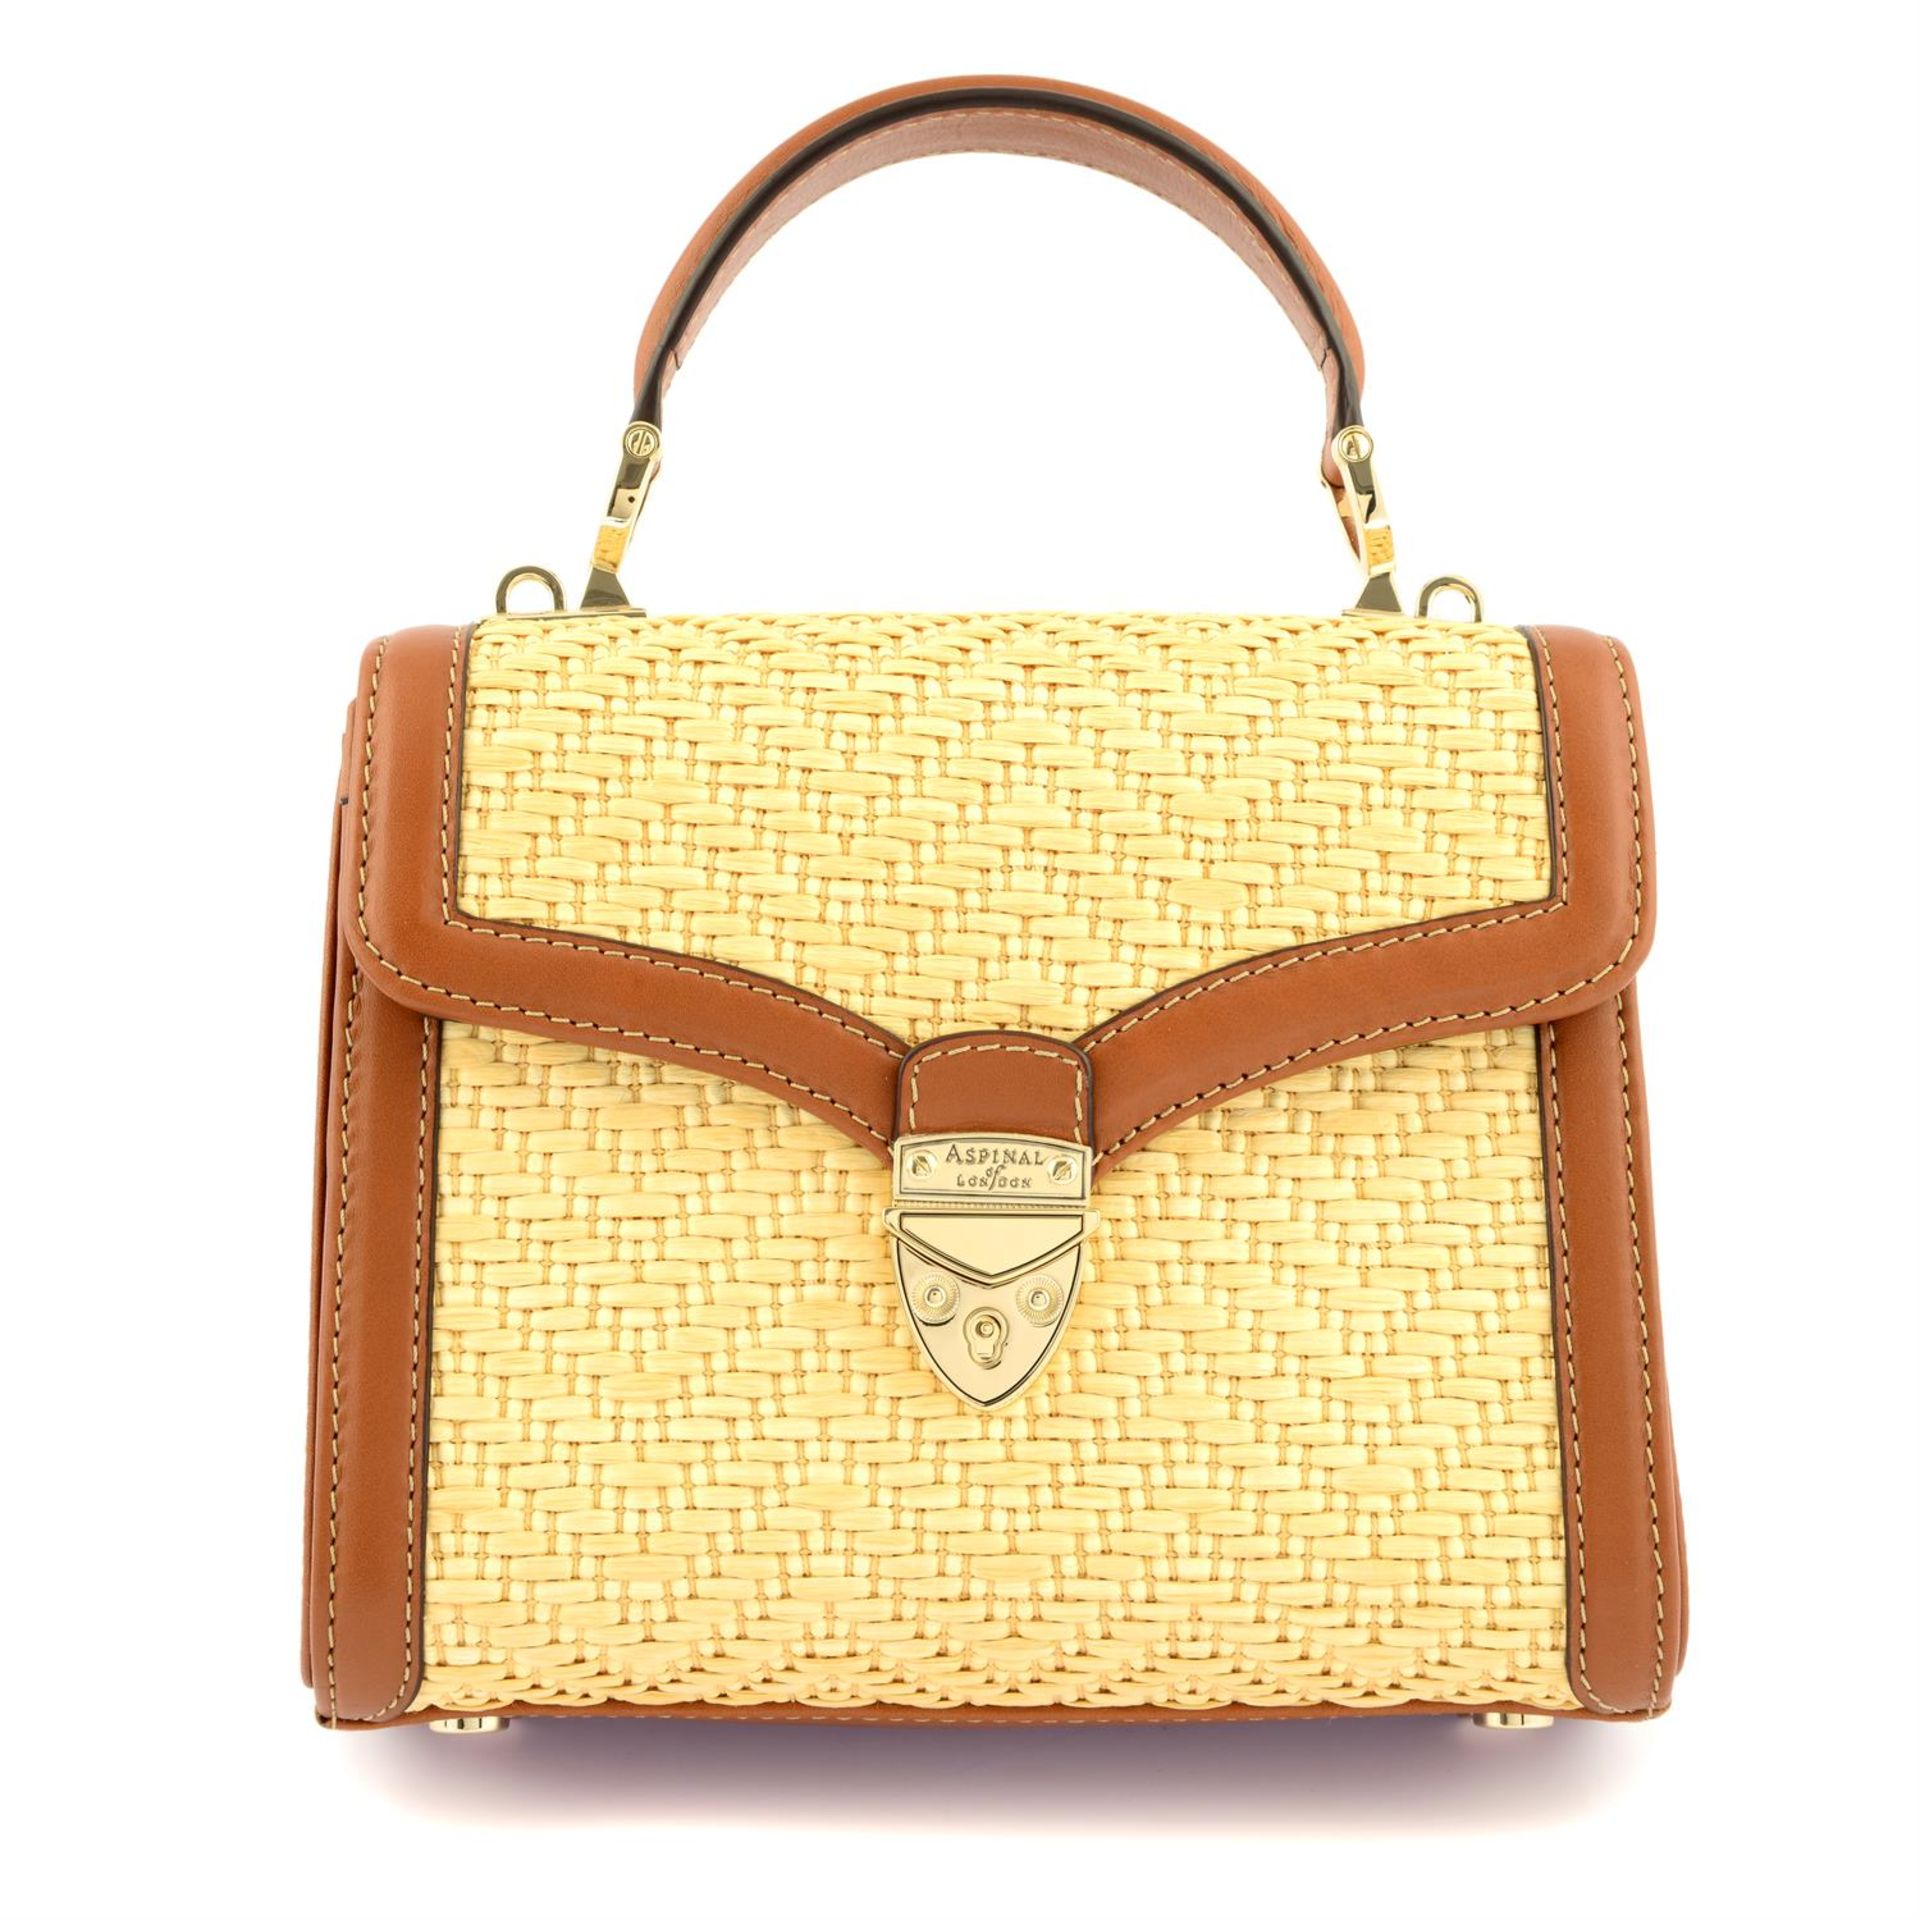 ASPINAL OF LONDON - a brown raffia and leather Mayfair Midi tote bag.